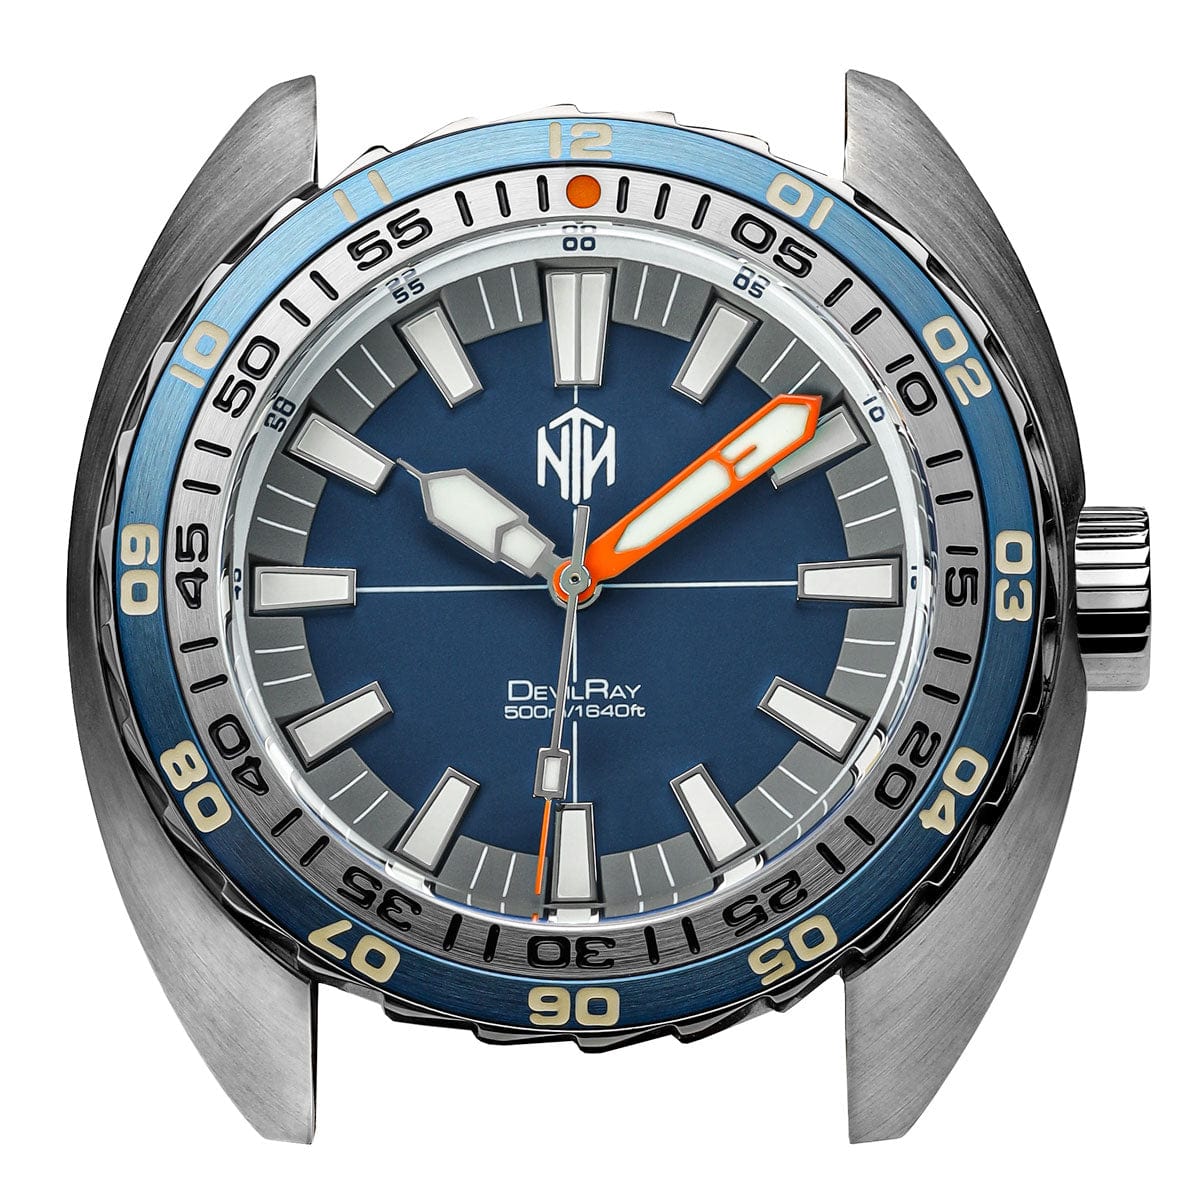 NTH DevilRay Dive Watch - Blue - WatchGecko Exclusive - Nearly New